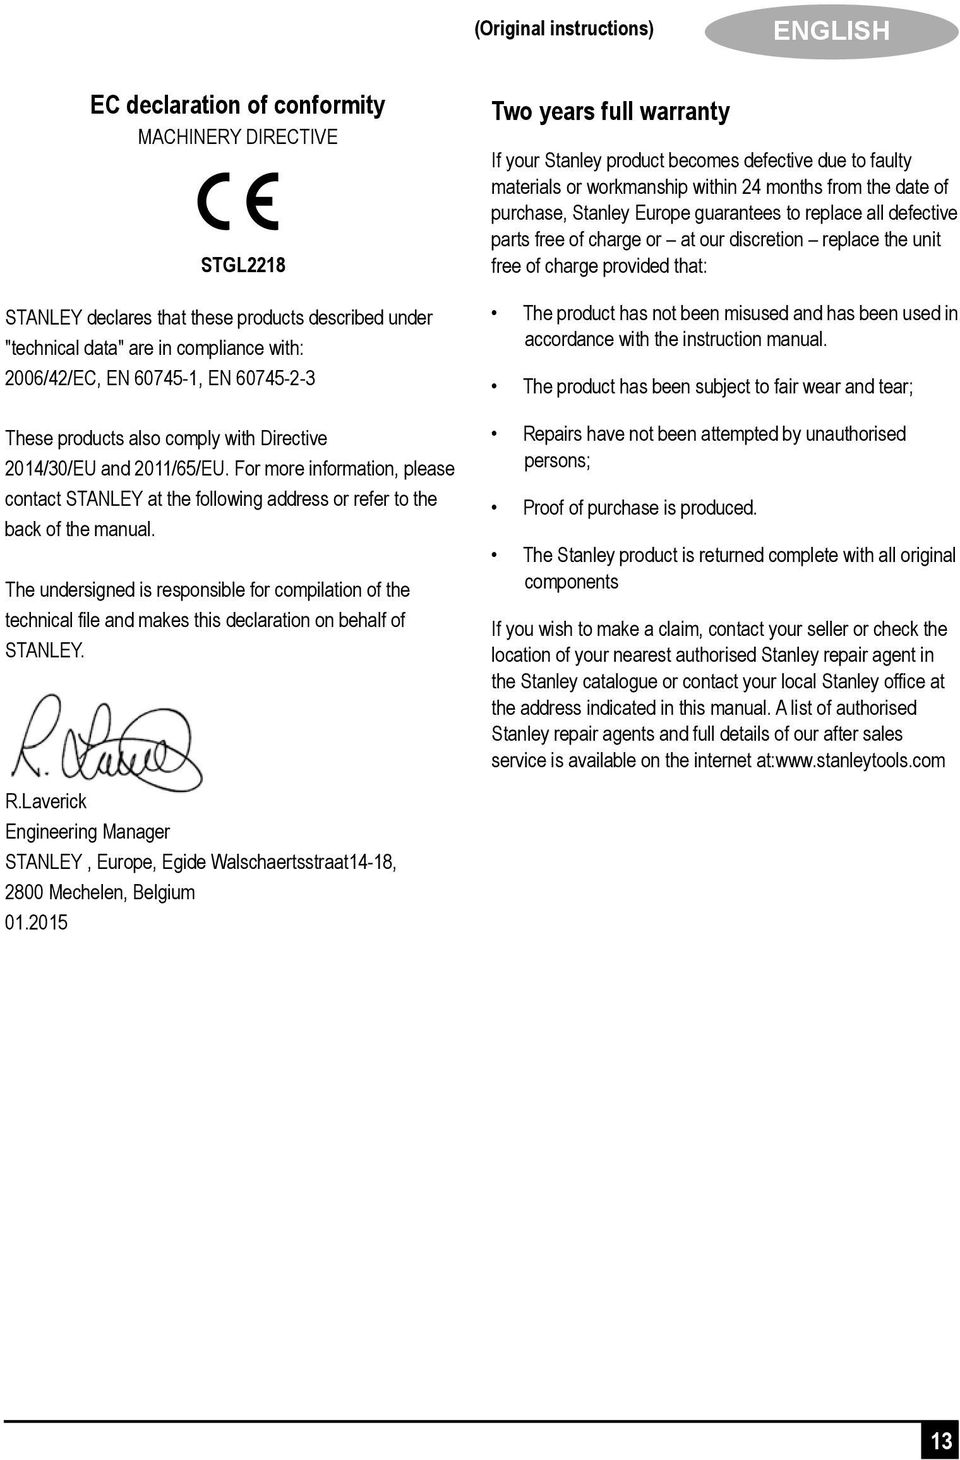 The undersigned is responsible for compilation of the technical file and makes this declaration on behalf of STANLEY. R.